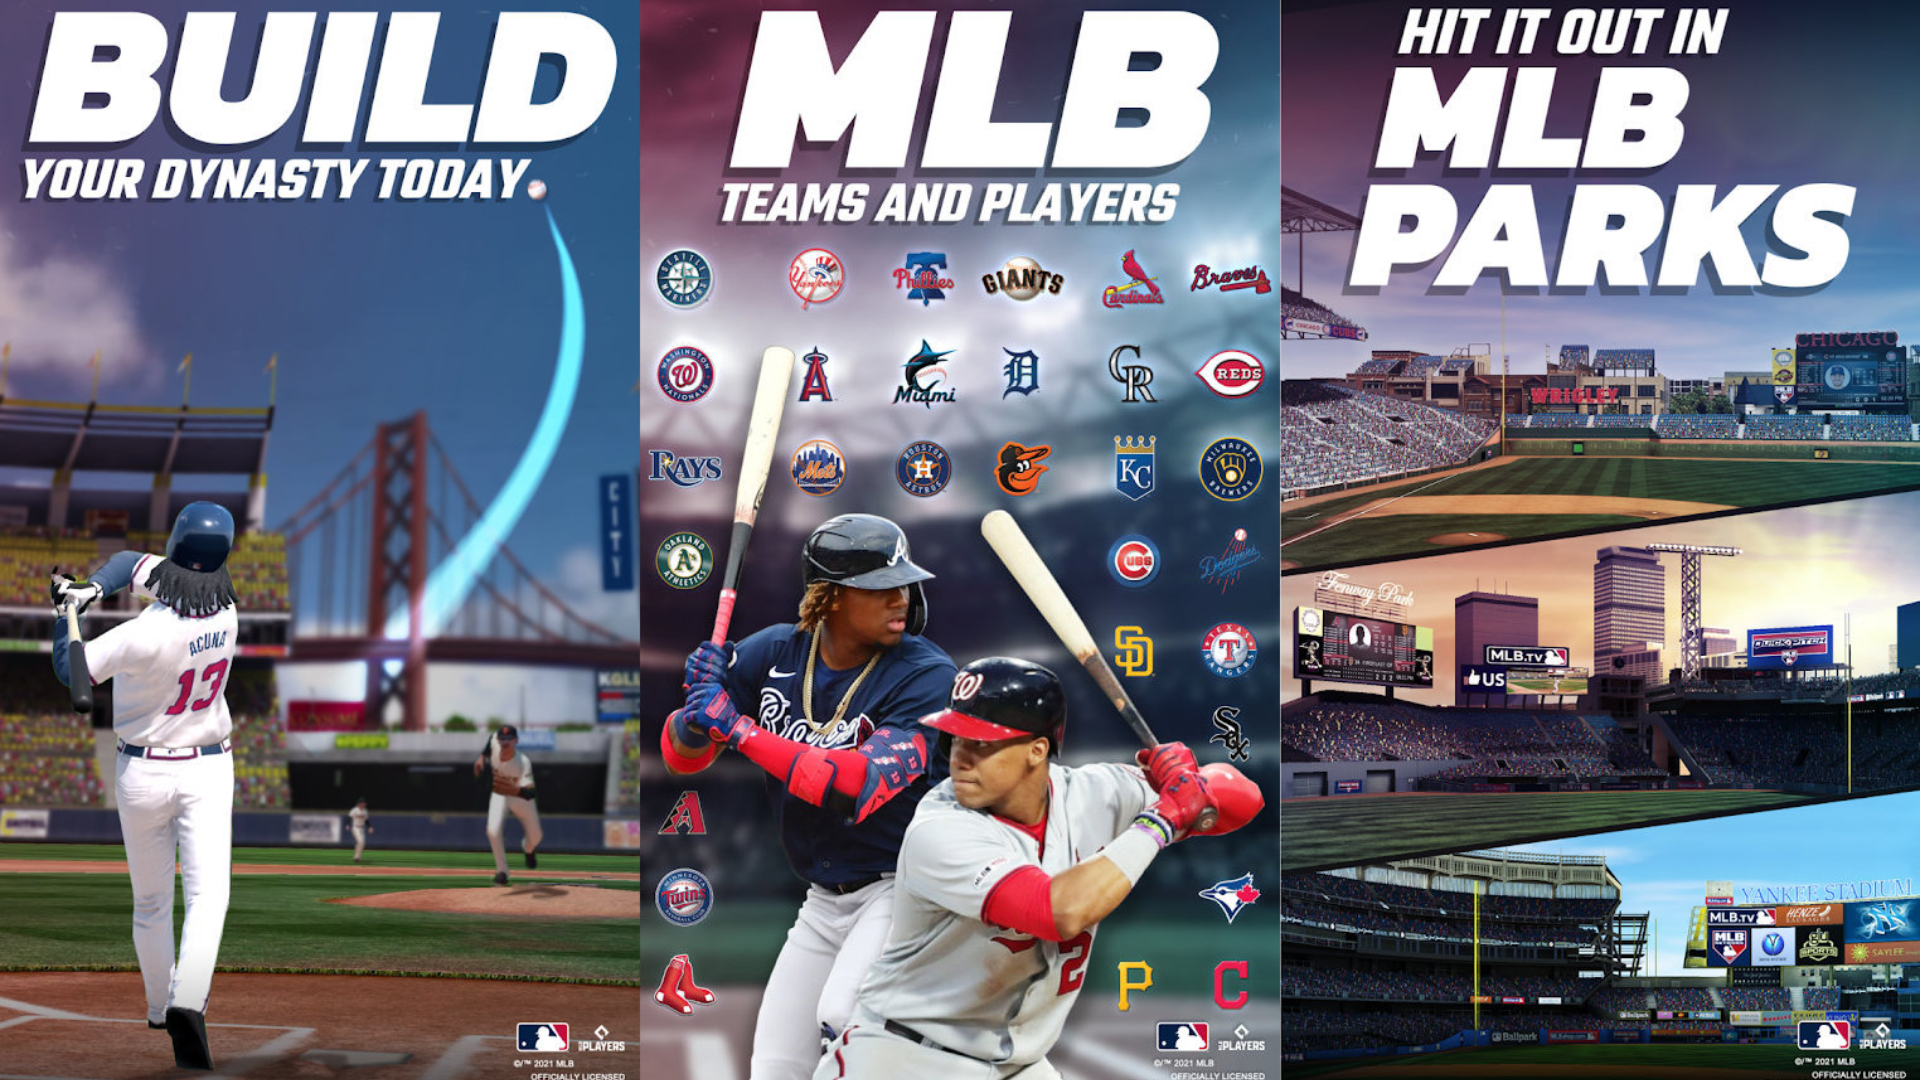 Best mobile sports games: MLB Tap Sports Baseball 2021. Image shows various images of baseball players playing baseball. Text reads "Build your dynasty today. MLB teams and players. Hit it out in MLB parks."